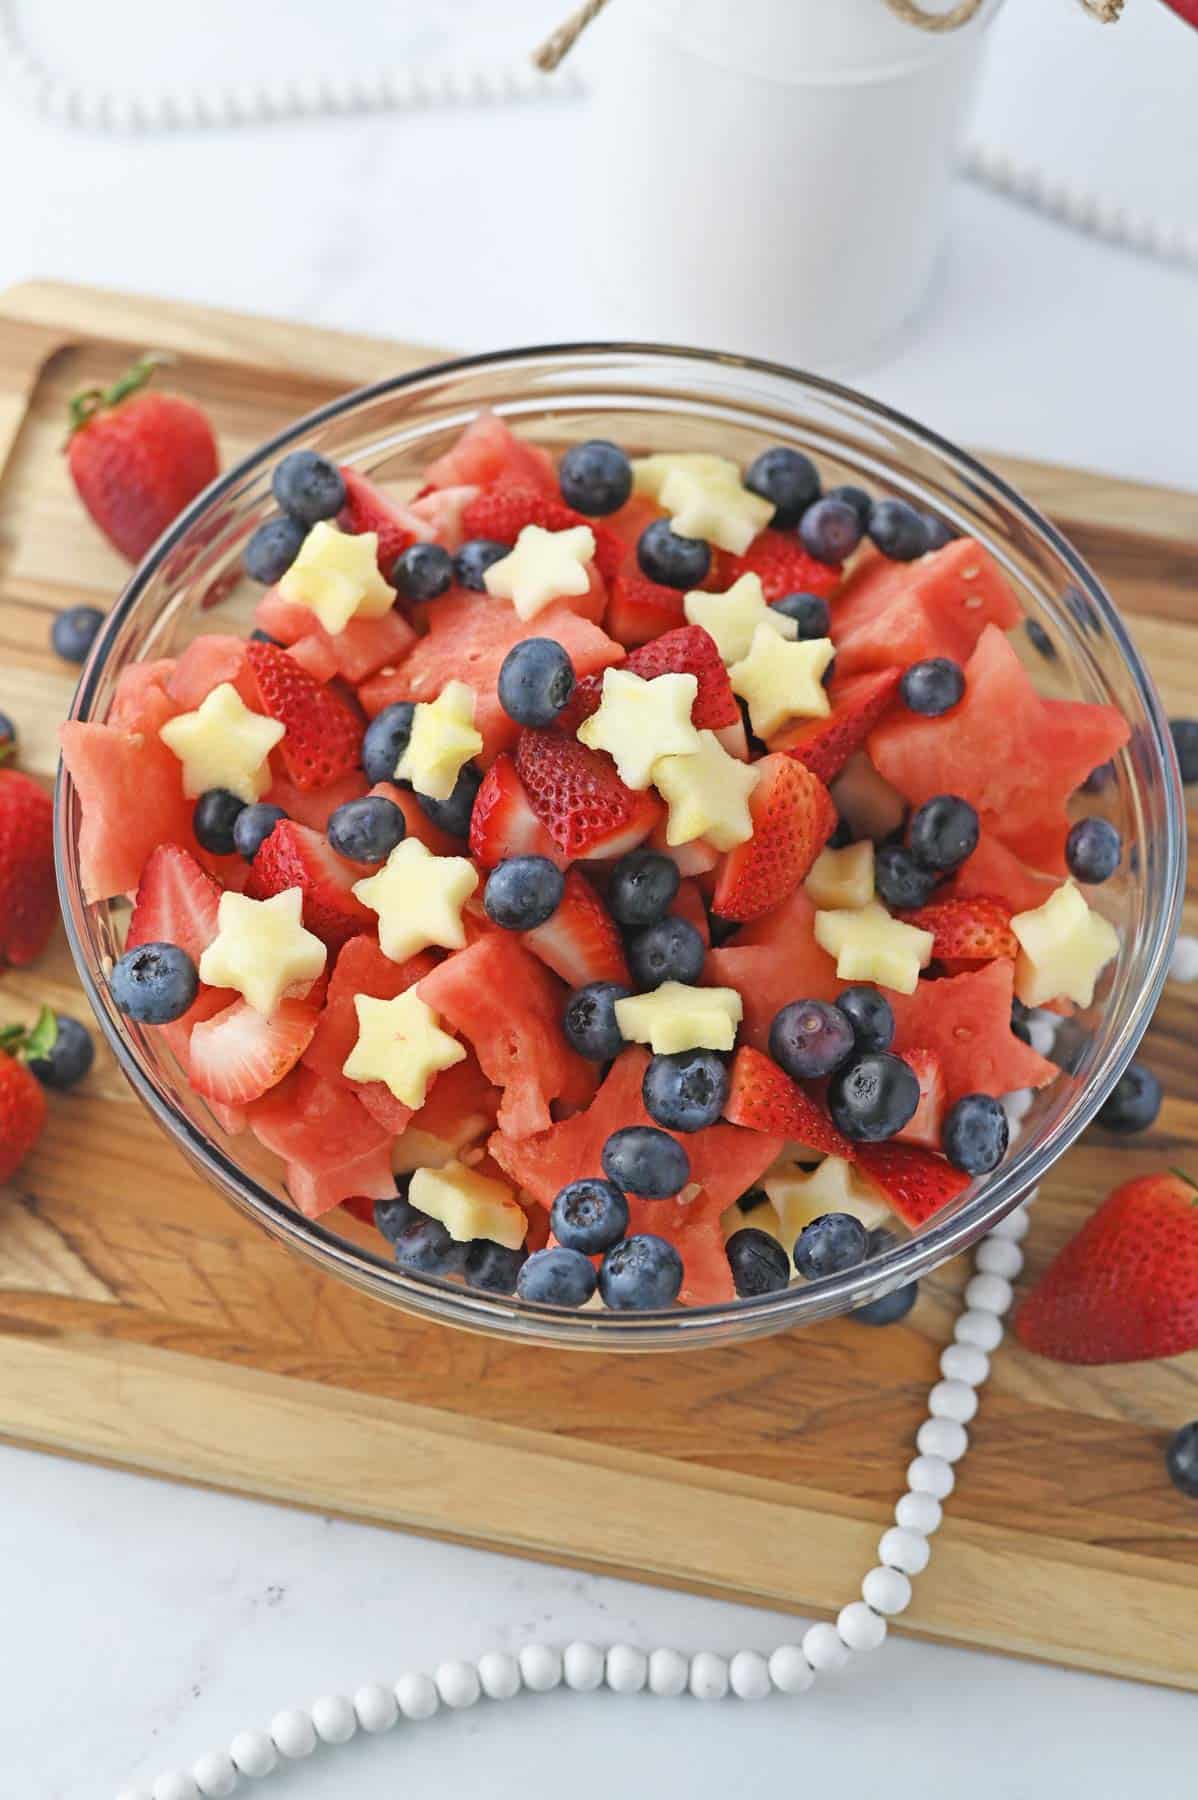 star-shaped watermelon, strawberries, and blueberries in glas sbowl